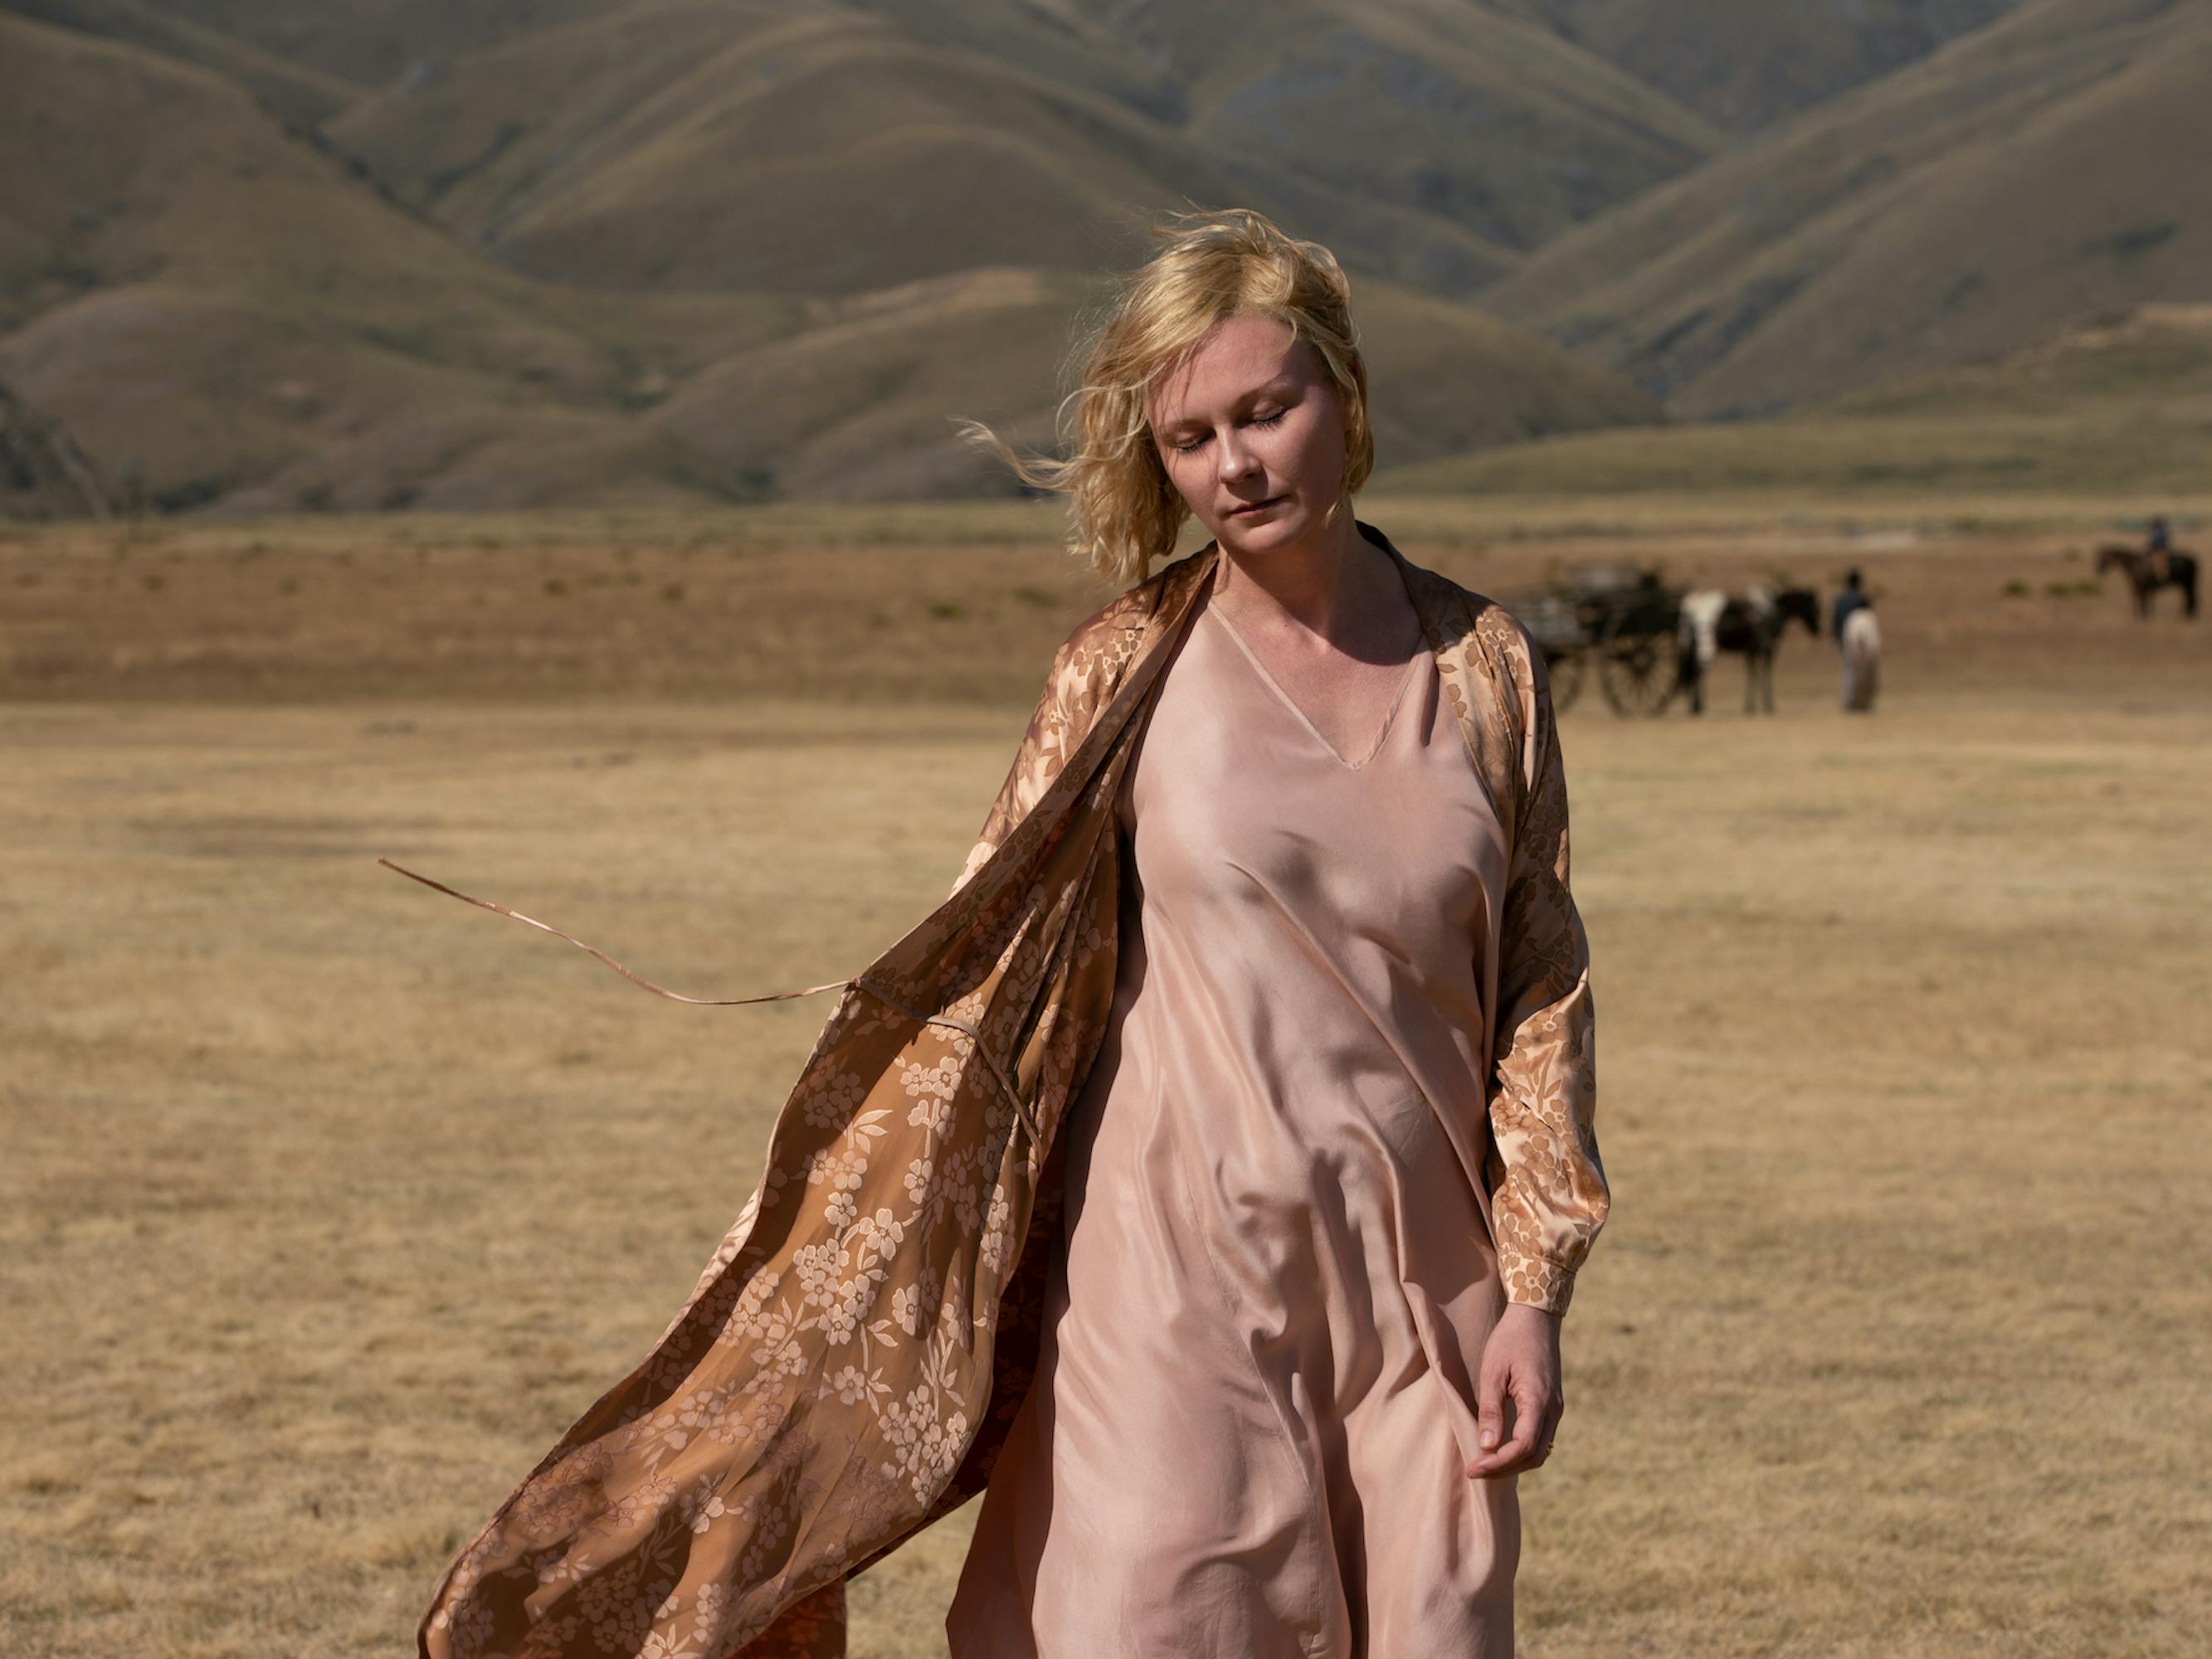 Rose (Kirsten Dunst) wears a long pink dress and brown floral robe as she stands in a dusty expanse with some horses behind her.